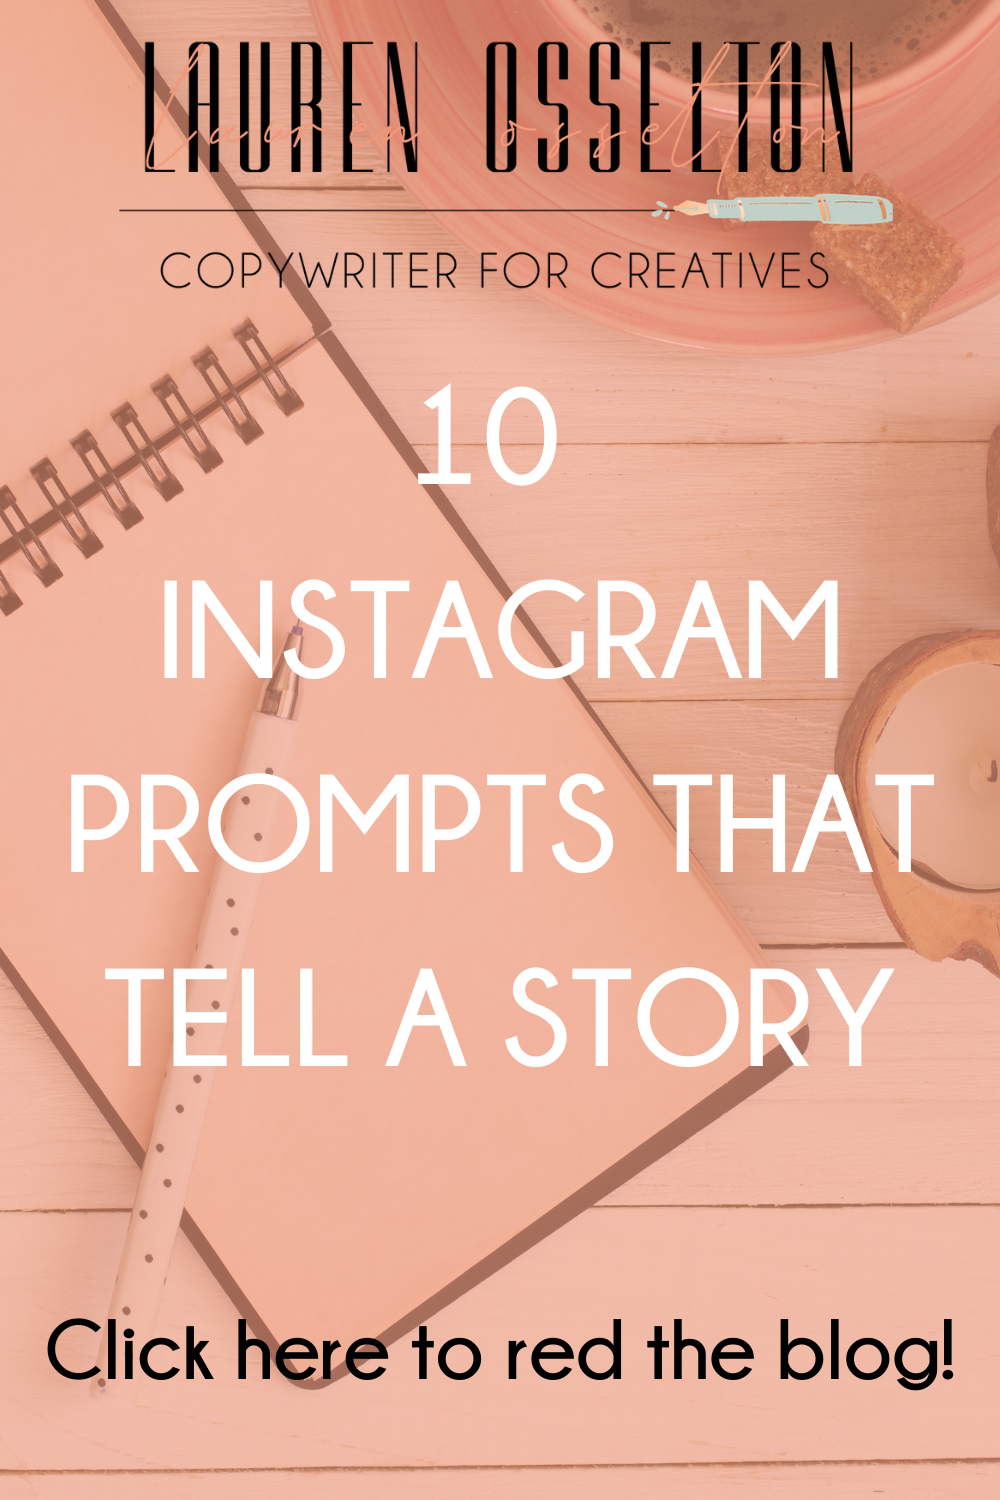 No idea of what to post on social media and Instagram? Check out this blog for 10 Instagram prompts designed to connect with your audience and never run out of instagram content ideas again! I know coming up with content for Instagram on top of running your creative business can feel daunting which is why I created this blog post so you can easily create Instagram content using your brand story even when you feel stuck! Click to read more!